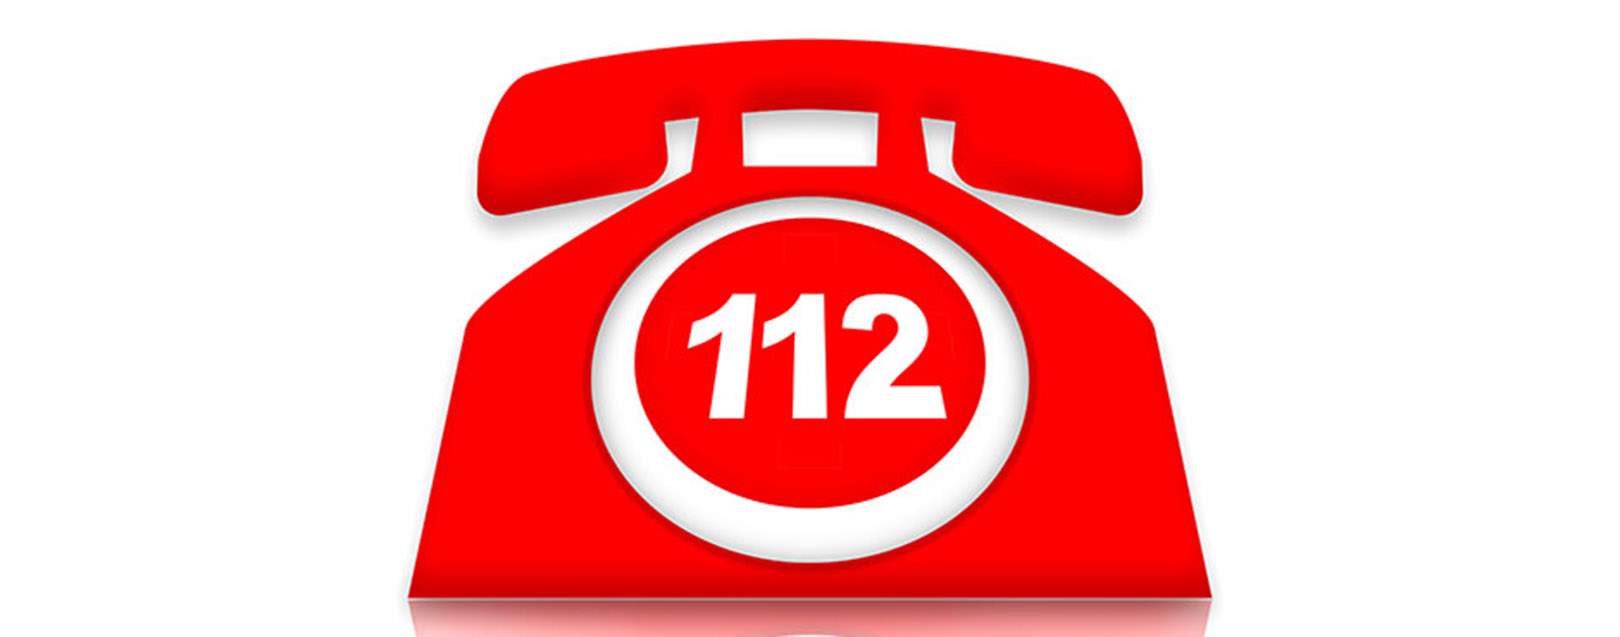 '112' to soon become single number for all emergency services